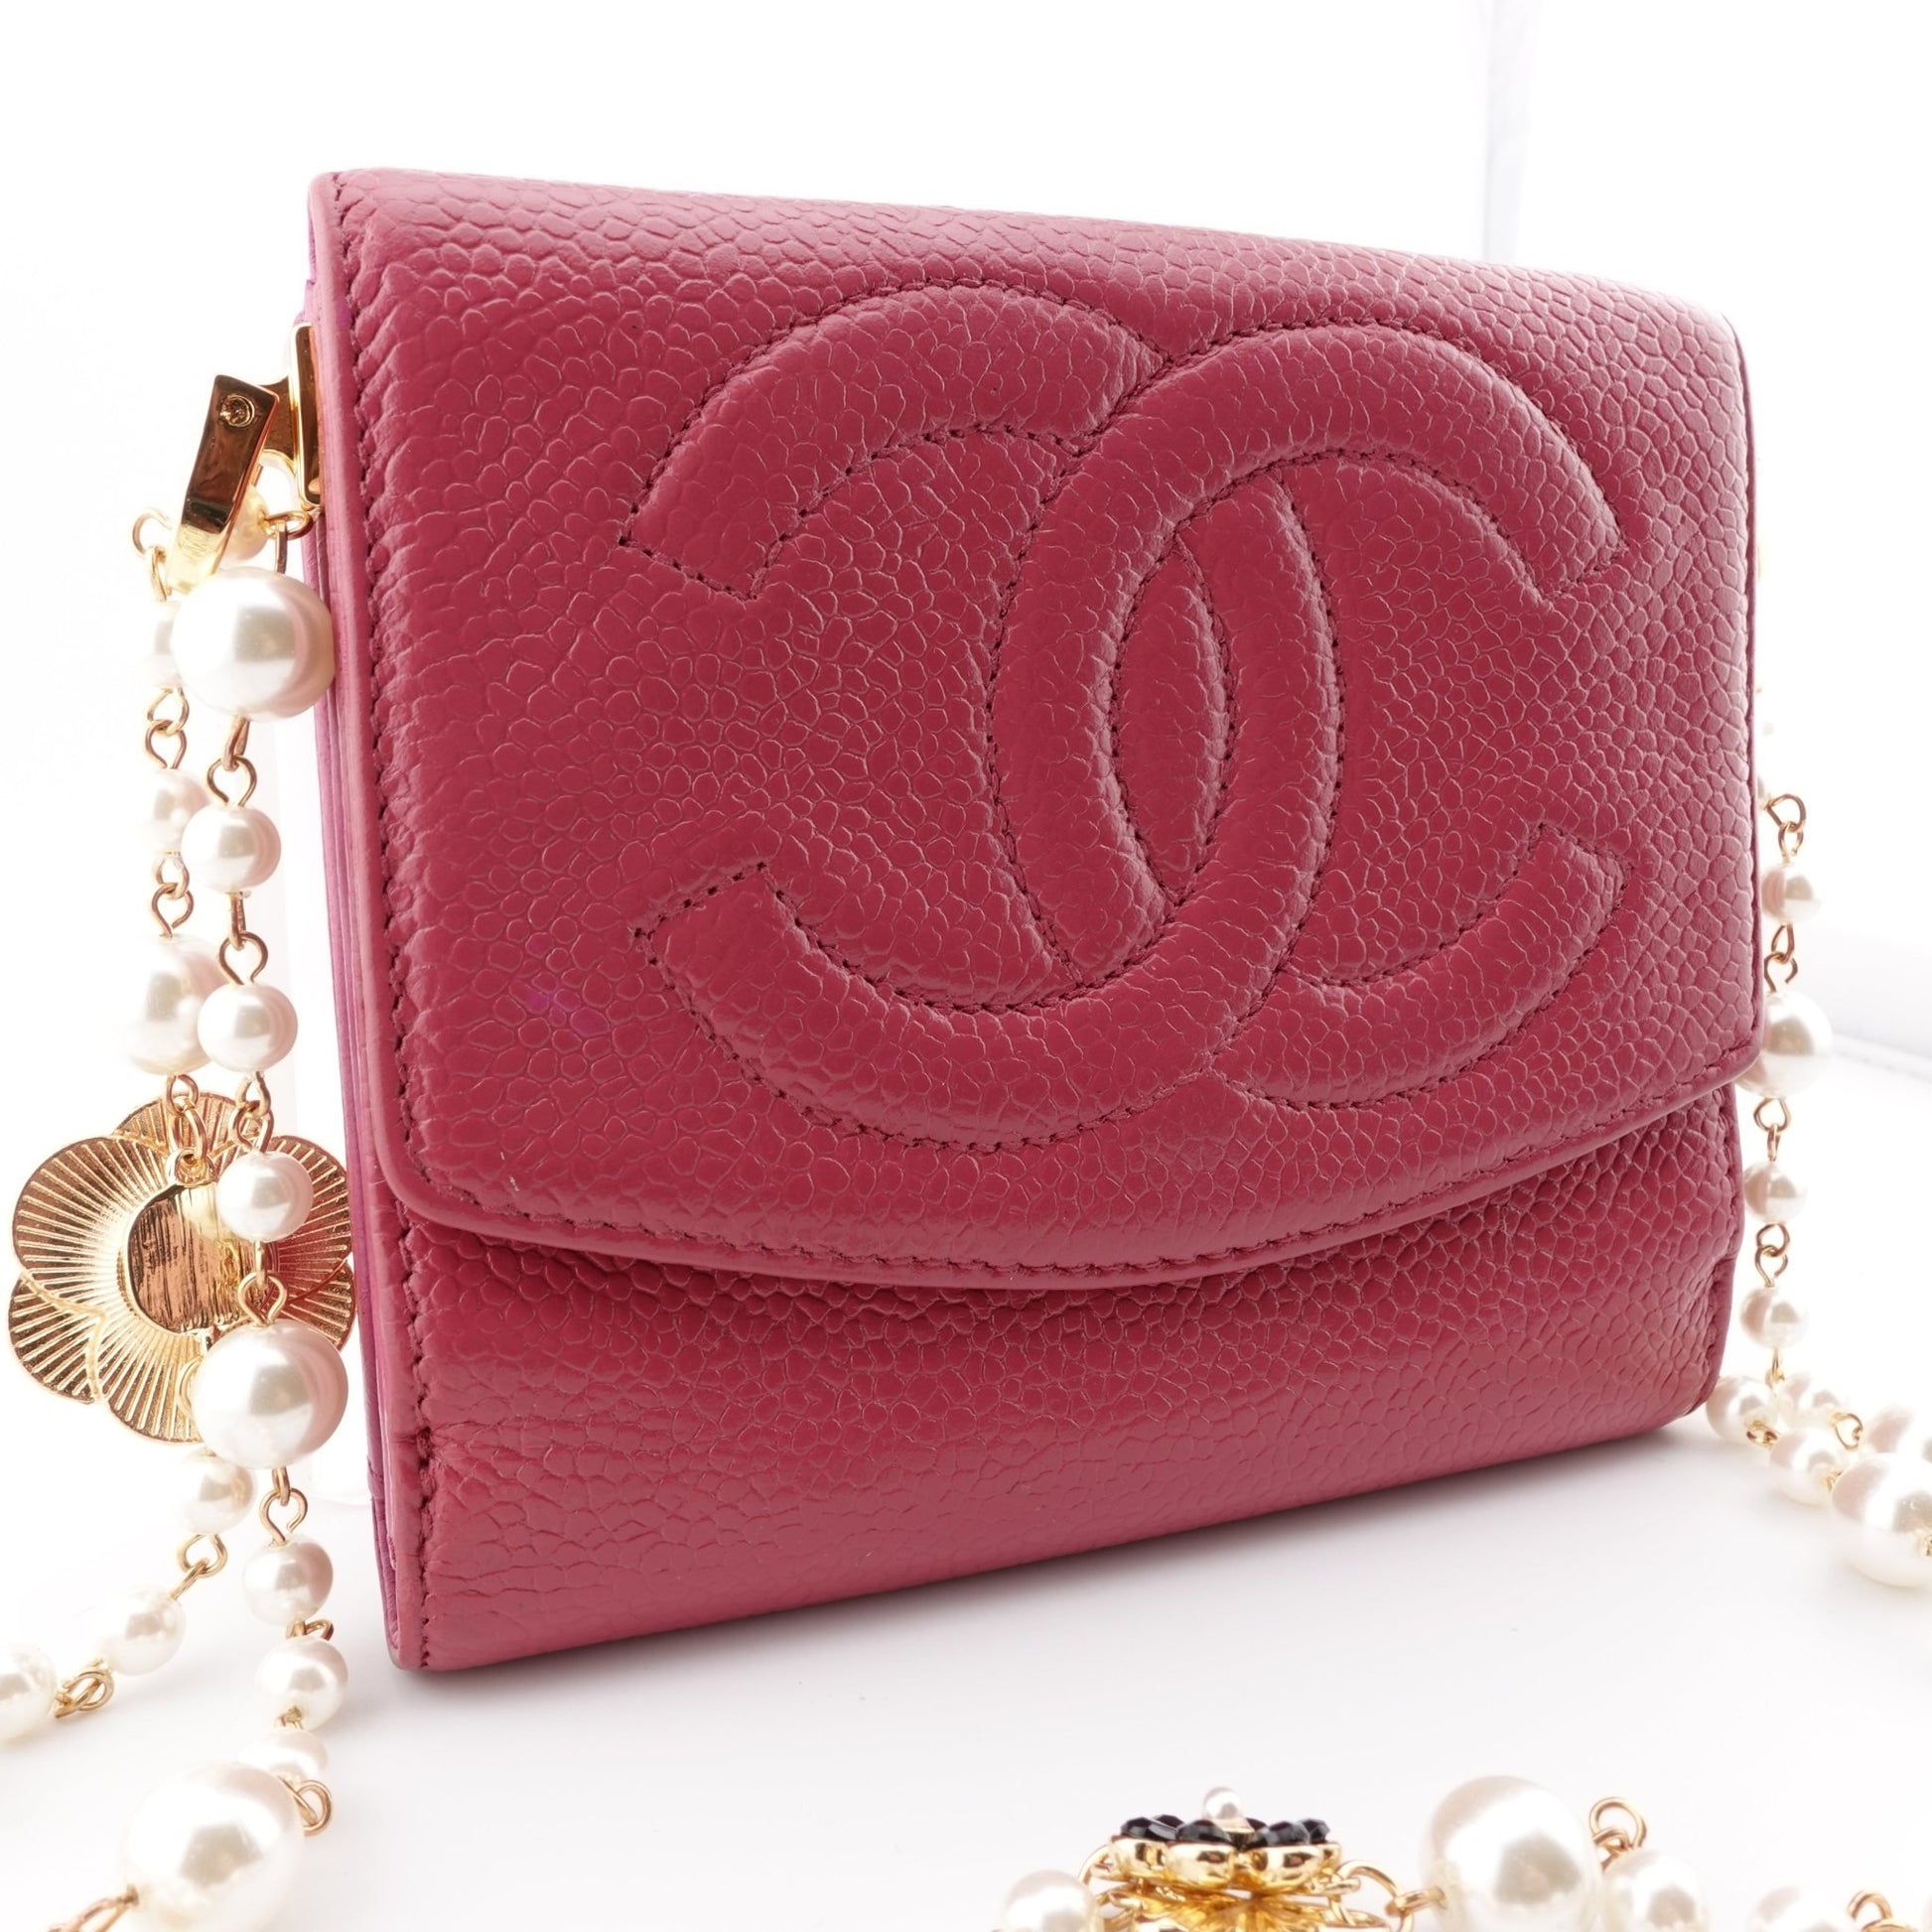 CHANEL Caviar Timeless Compact Wallet on Pearl Chain - Bag Envy